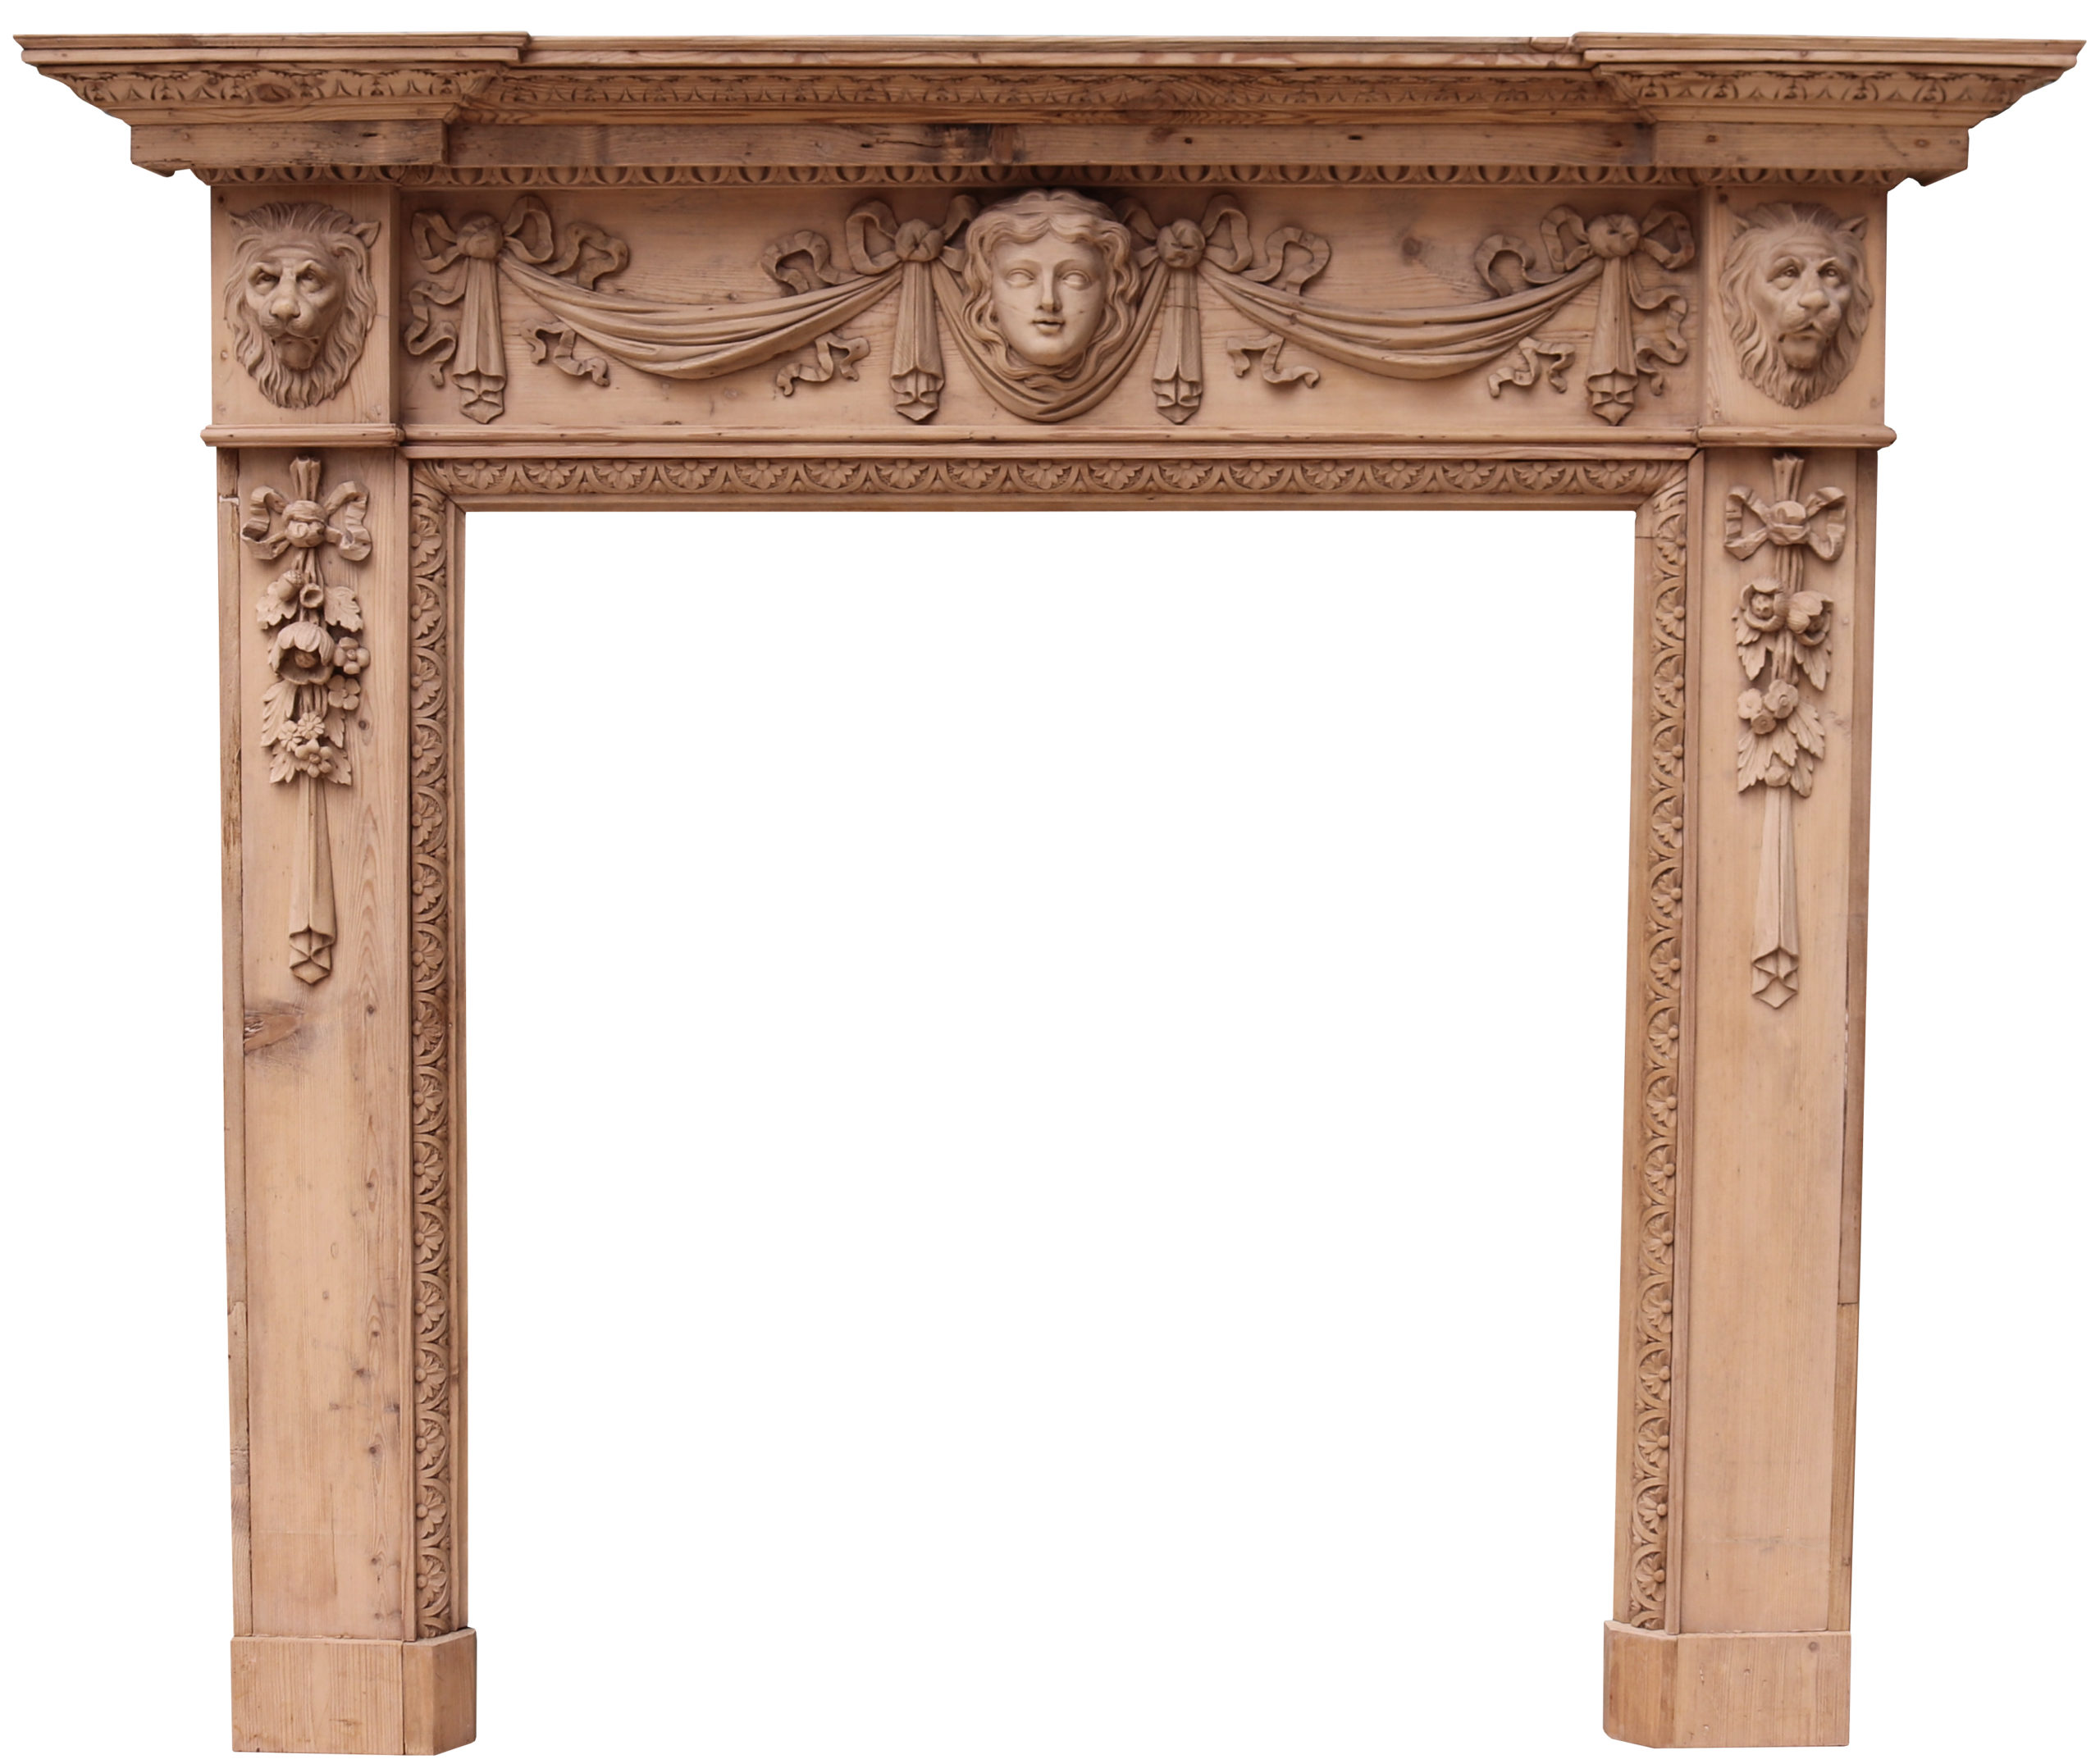 An Antique Carved Pine Fire Surround In, Antique Fireplace Surround Uk